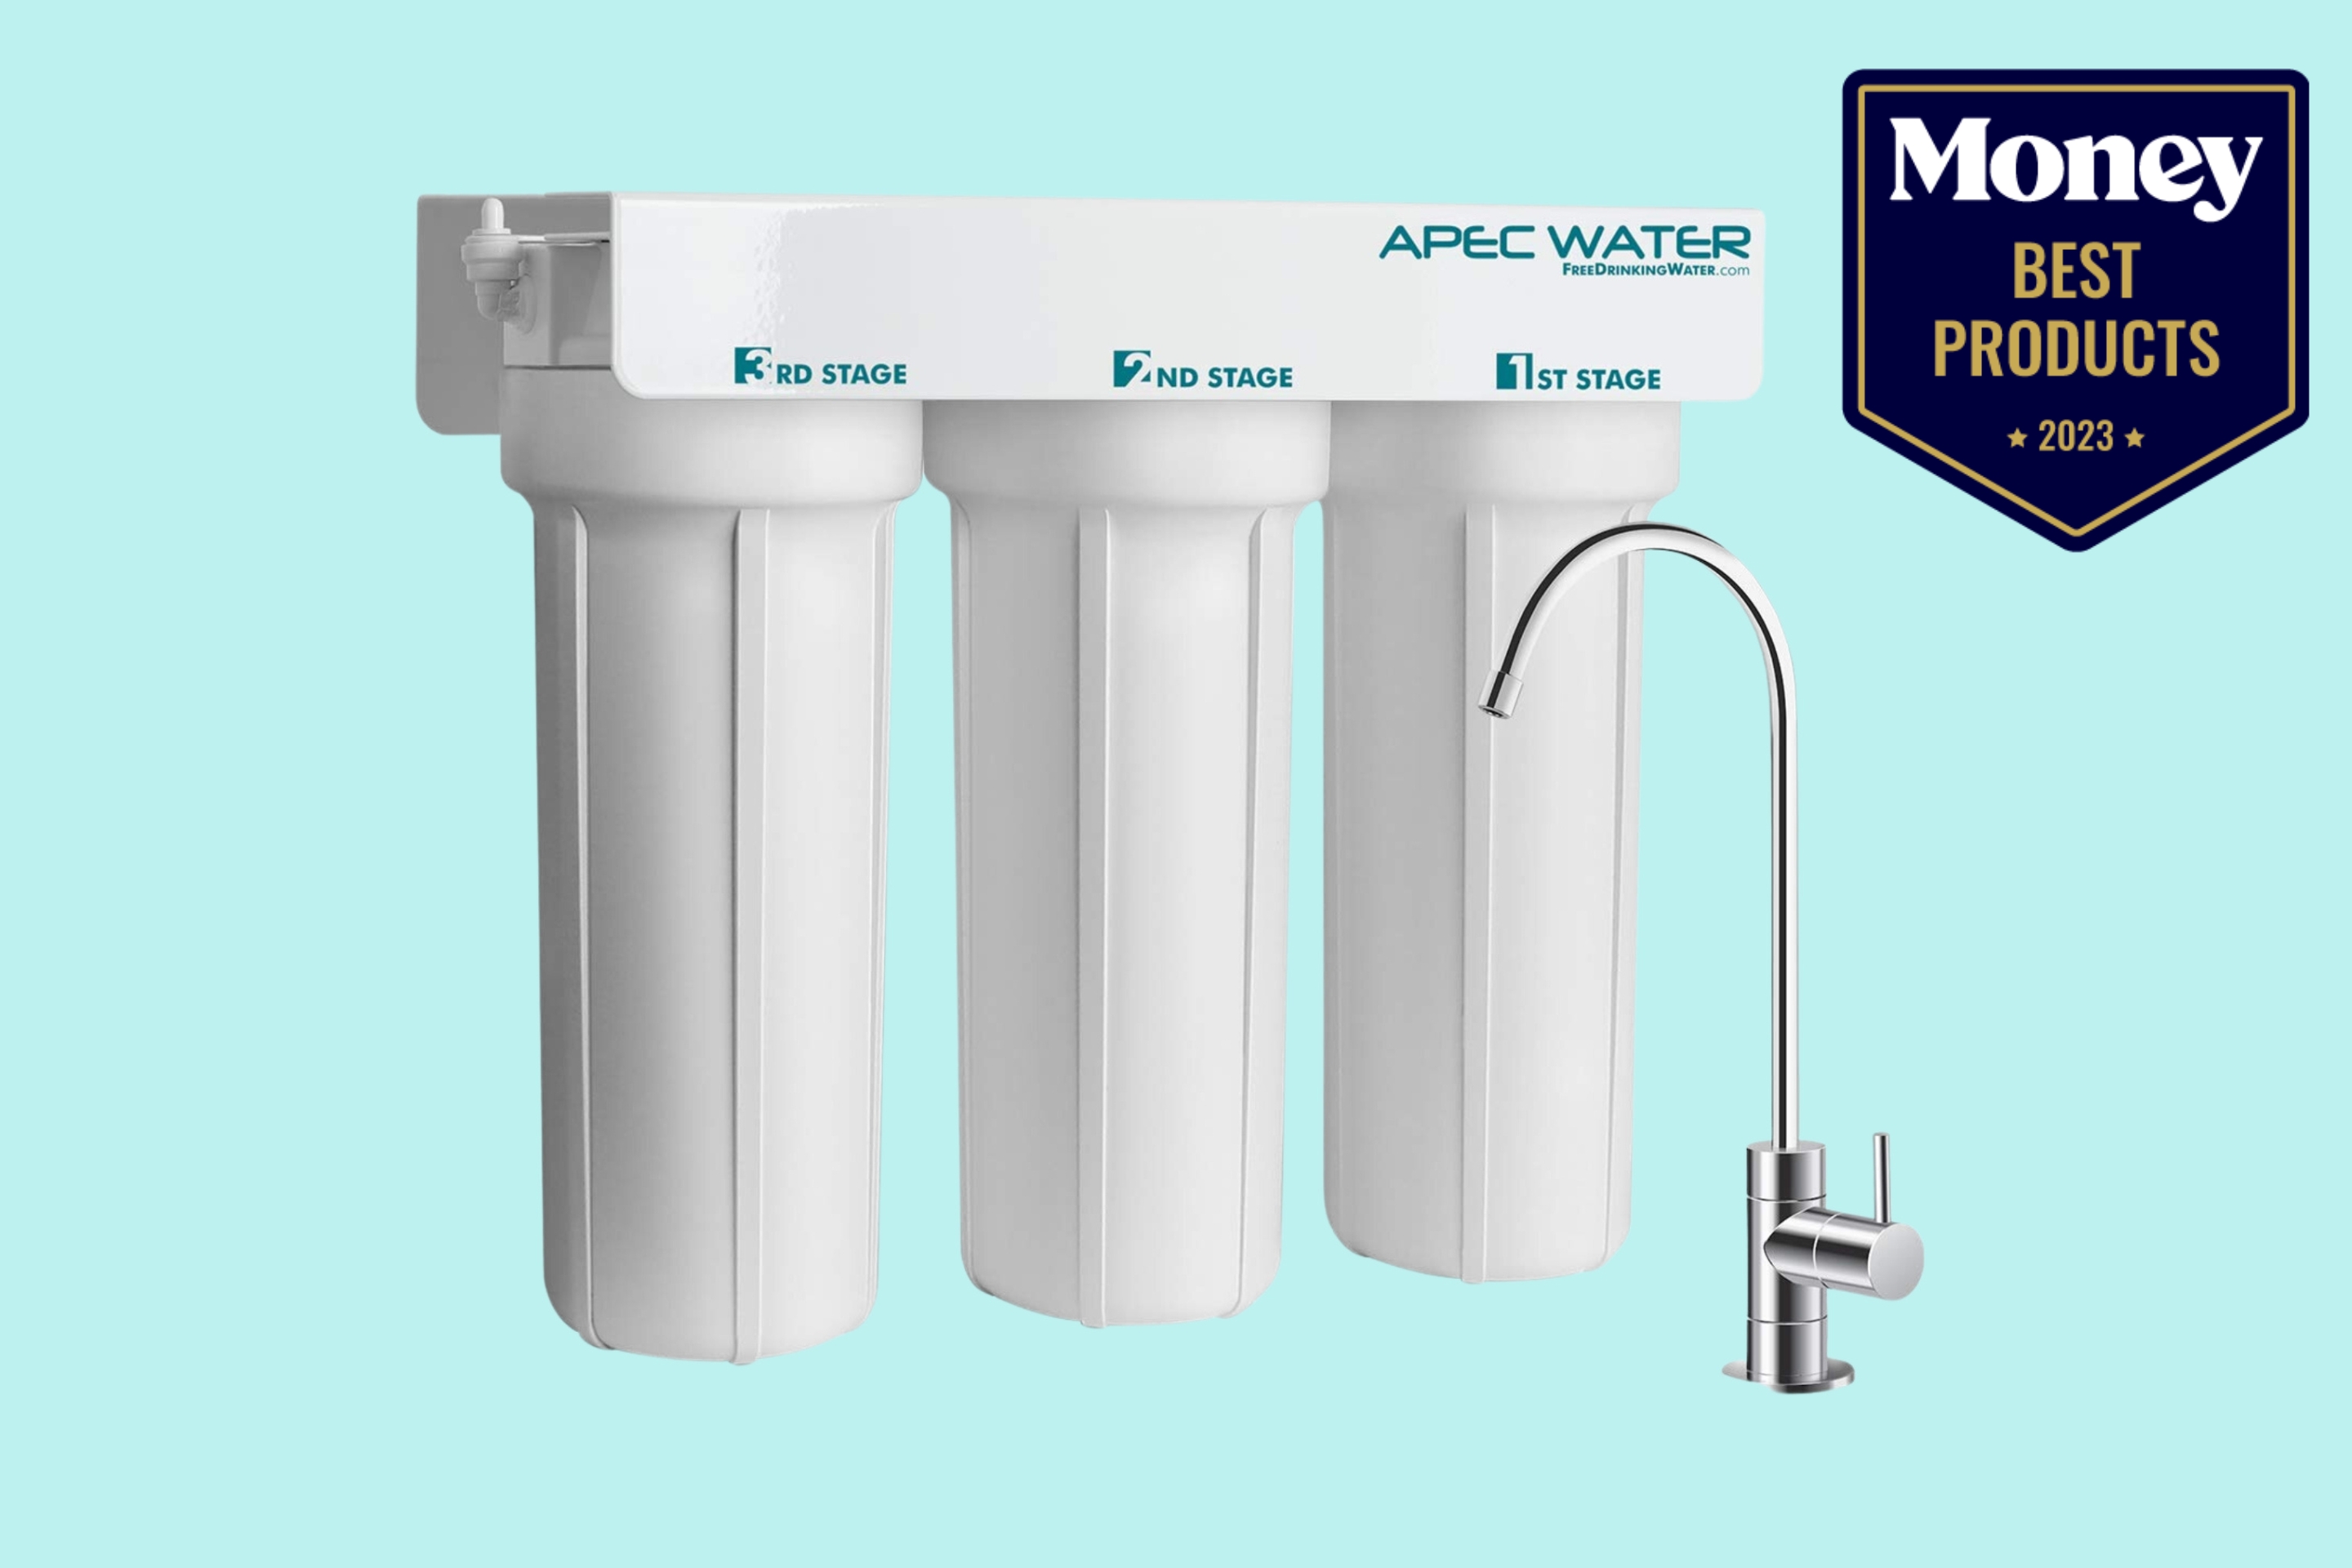 The Best Home Water Filtration Systems for Your Money